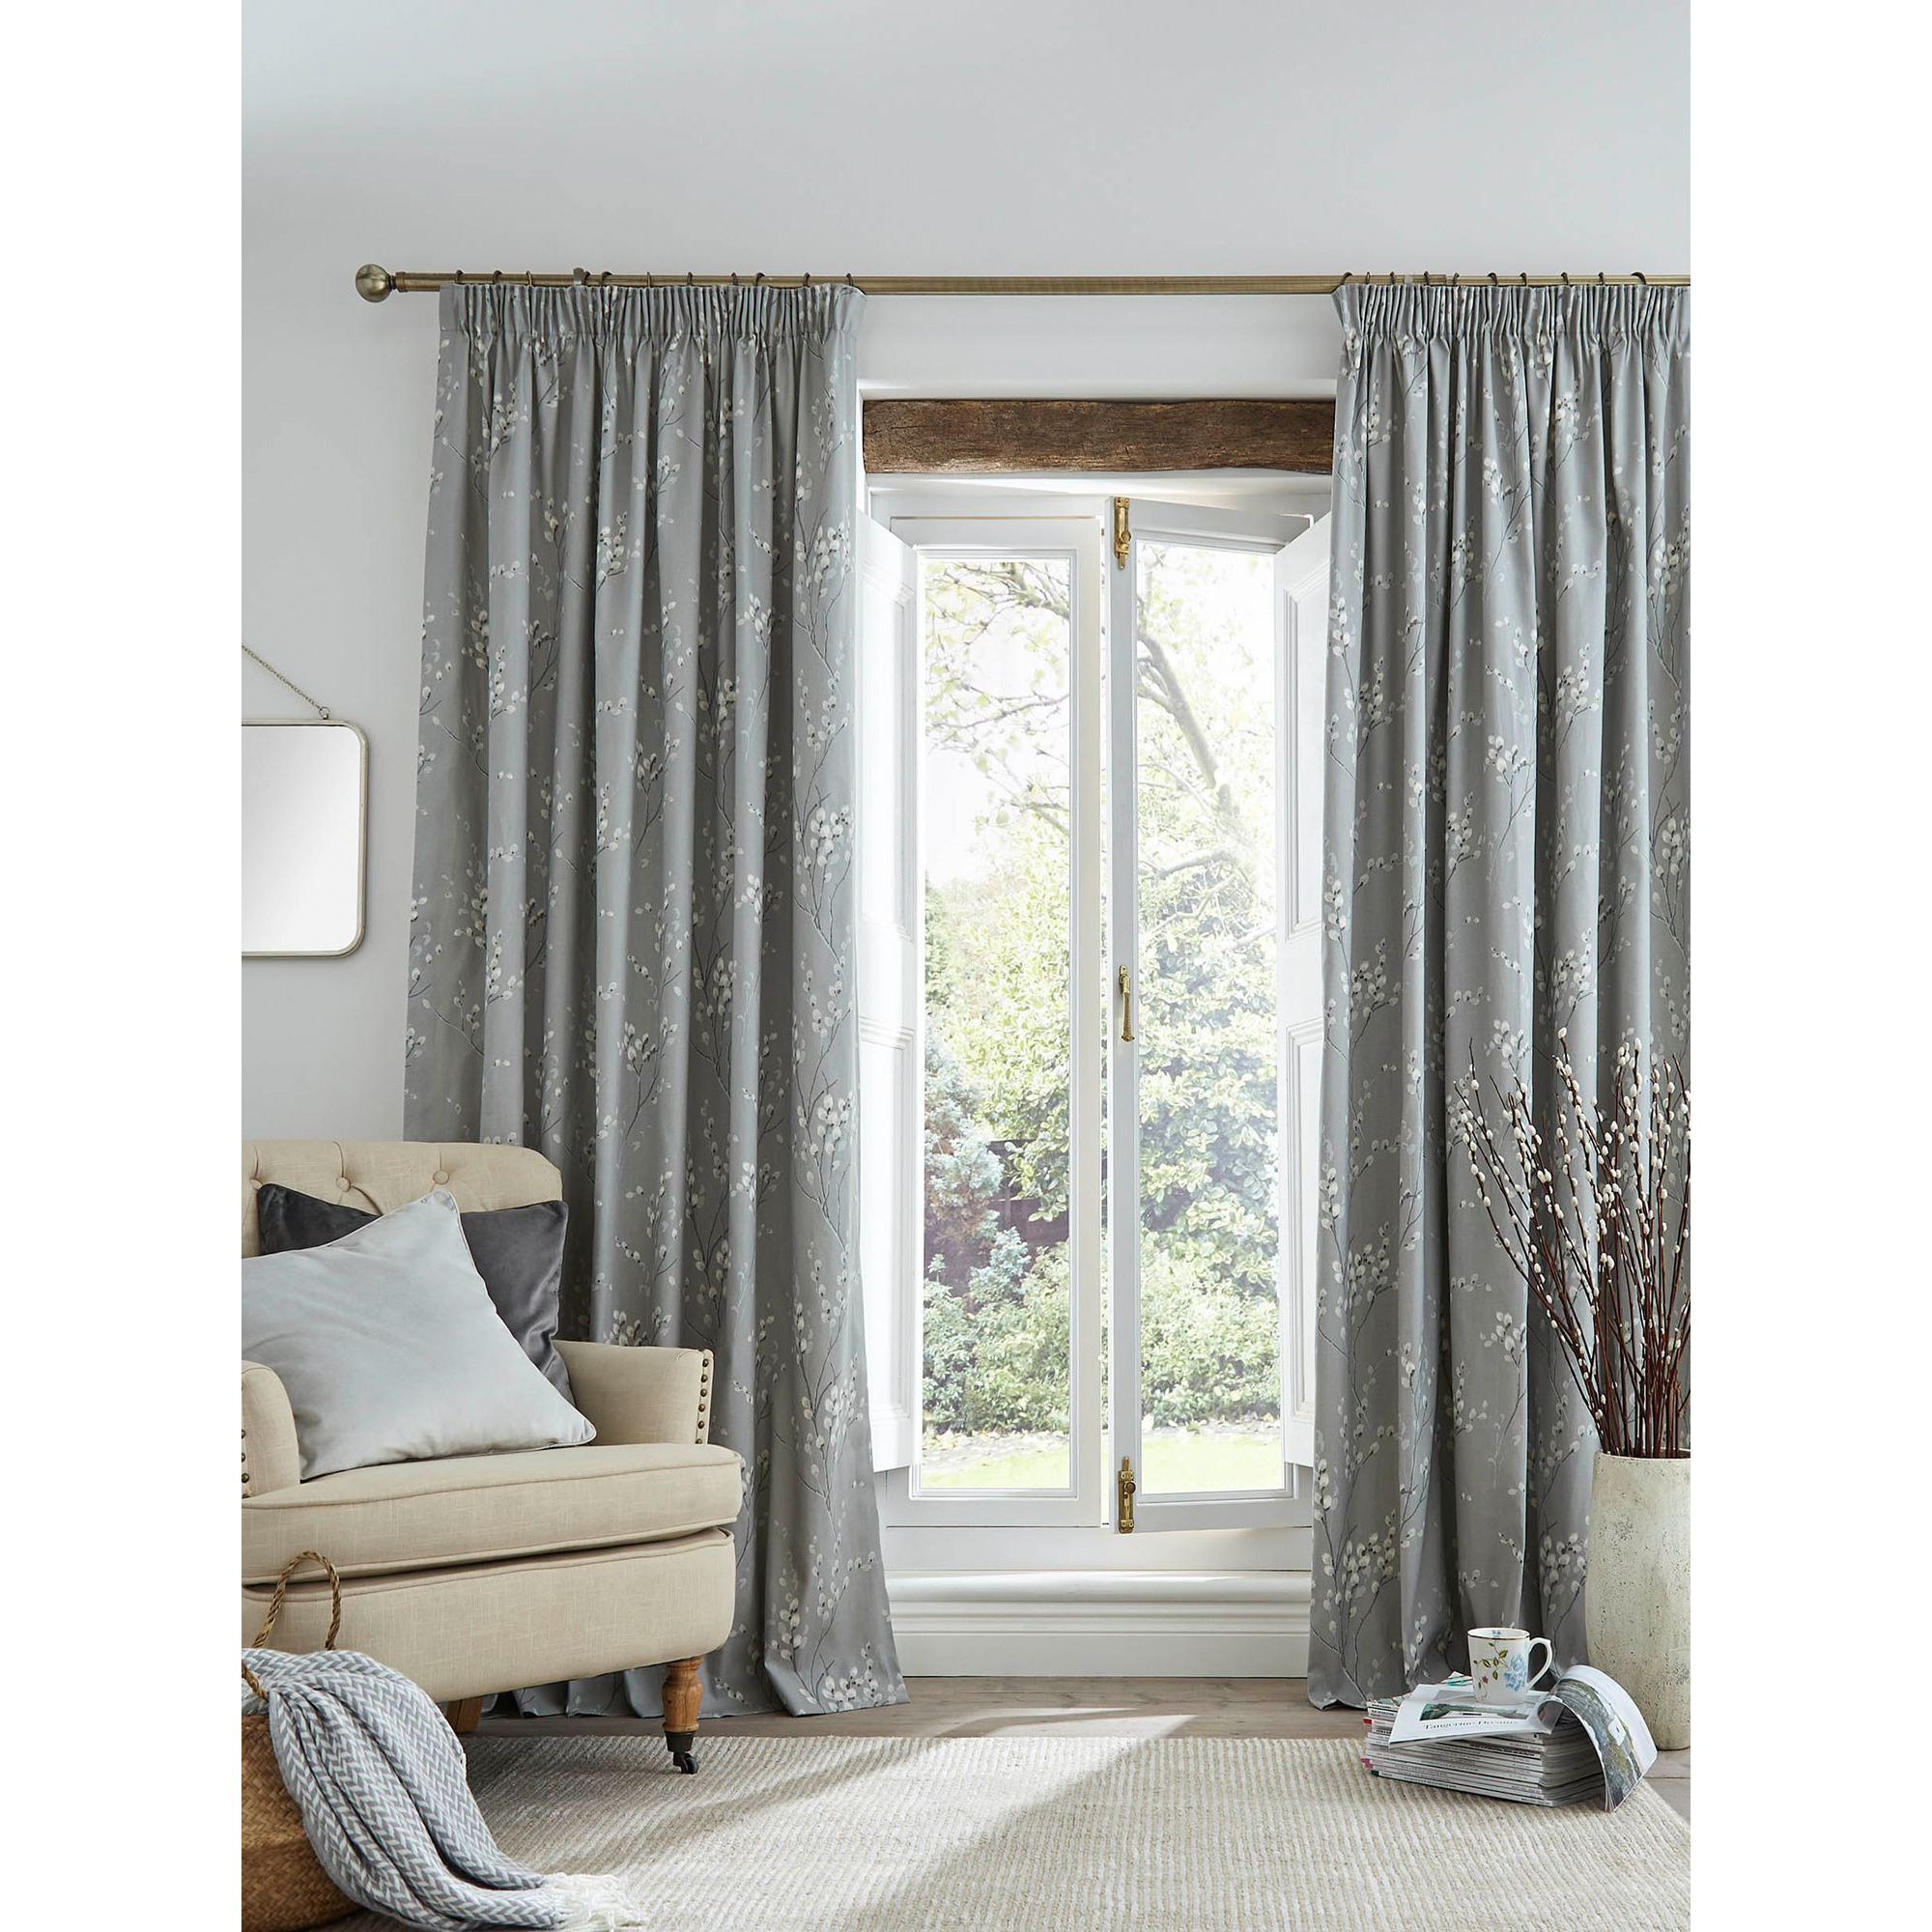 Laura Ashley Pussy Willow Pair Lined Pencil Pleat Curtains, Steel - image 1